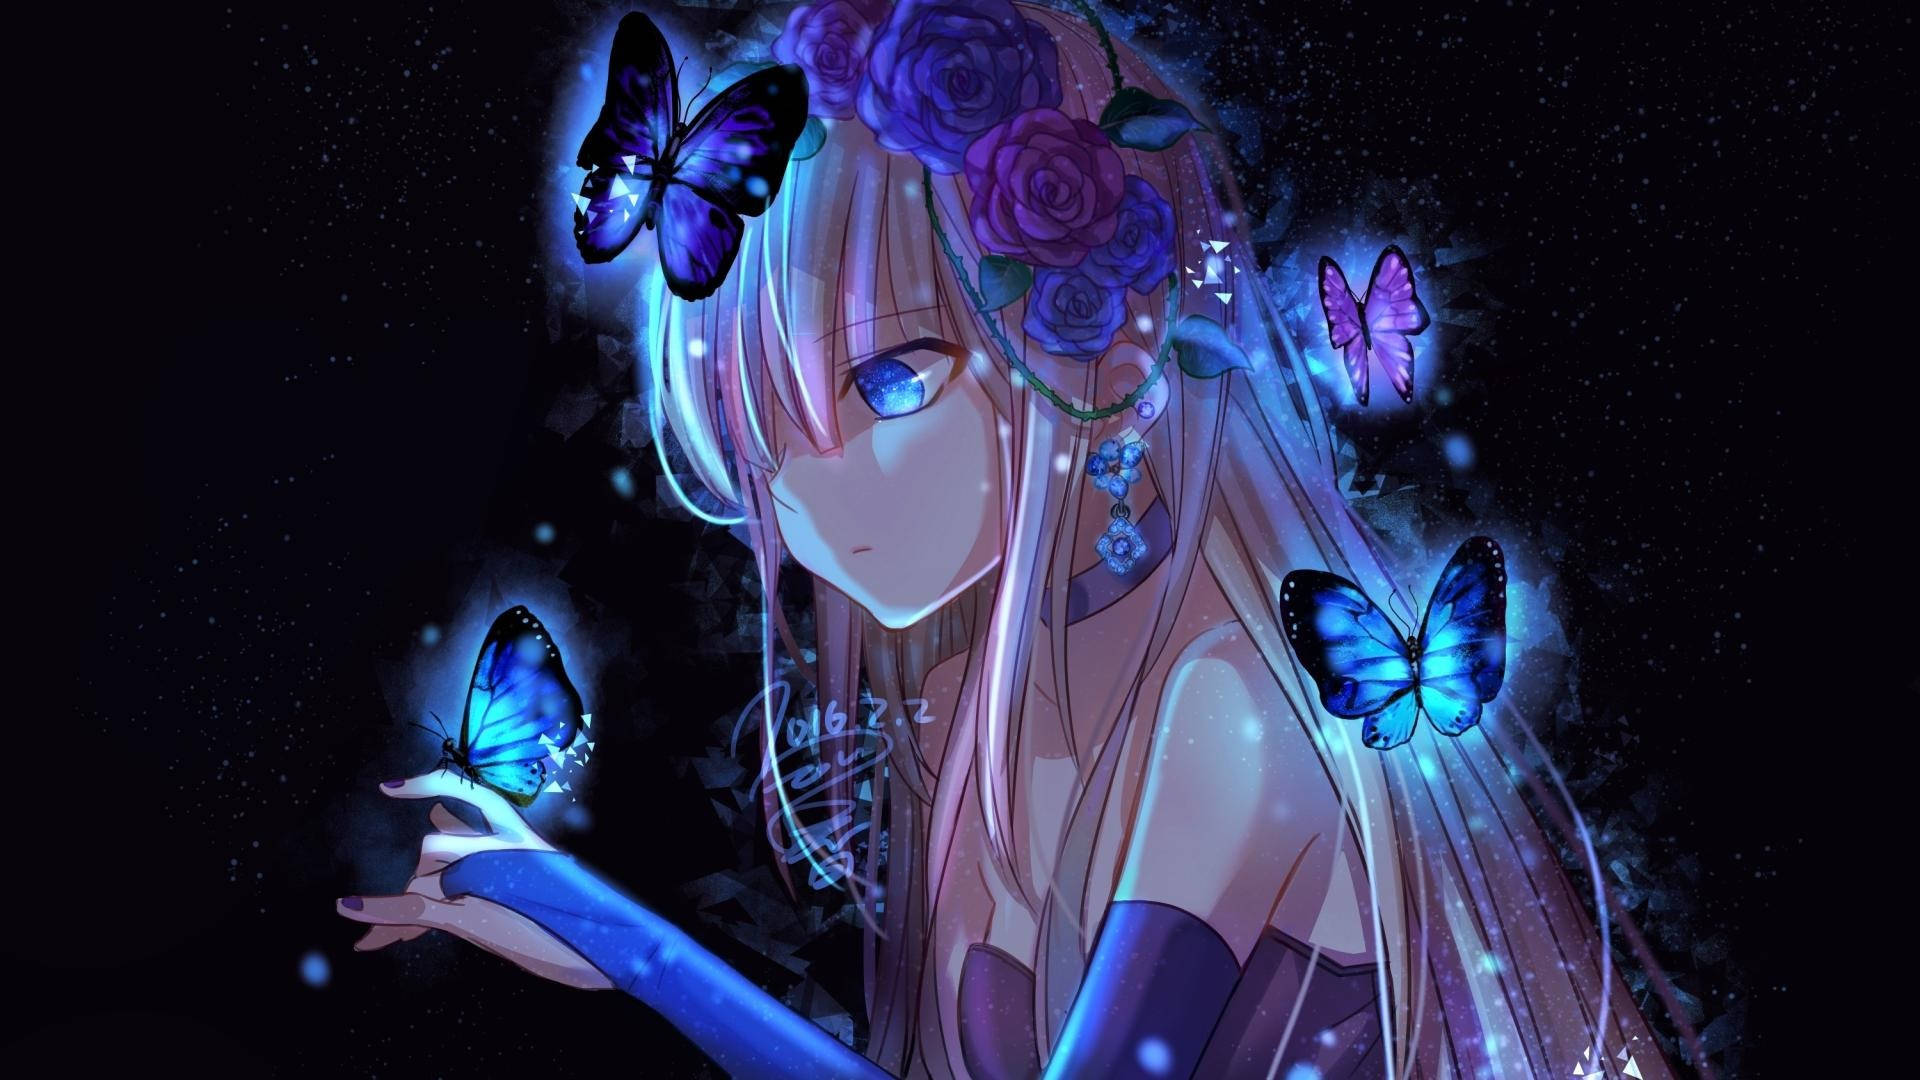 Cool Anime Girl With Butterflies Wallpaper